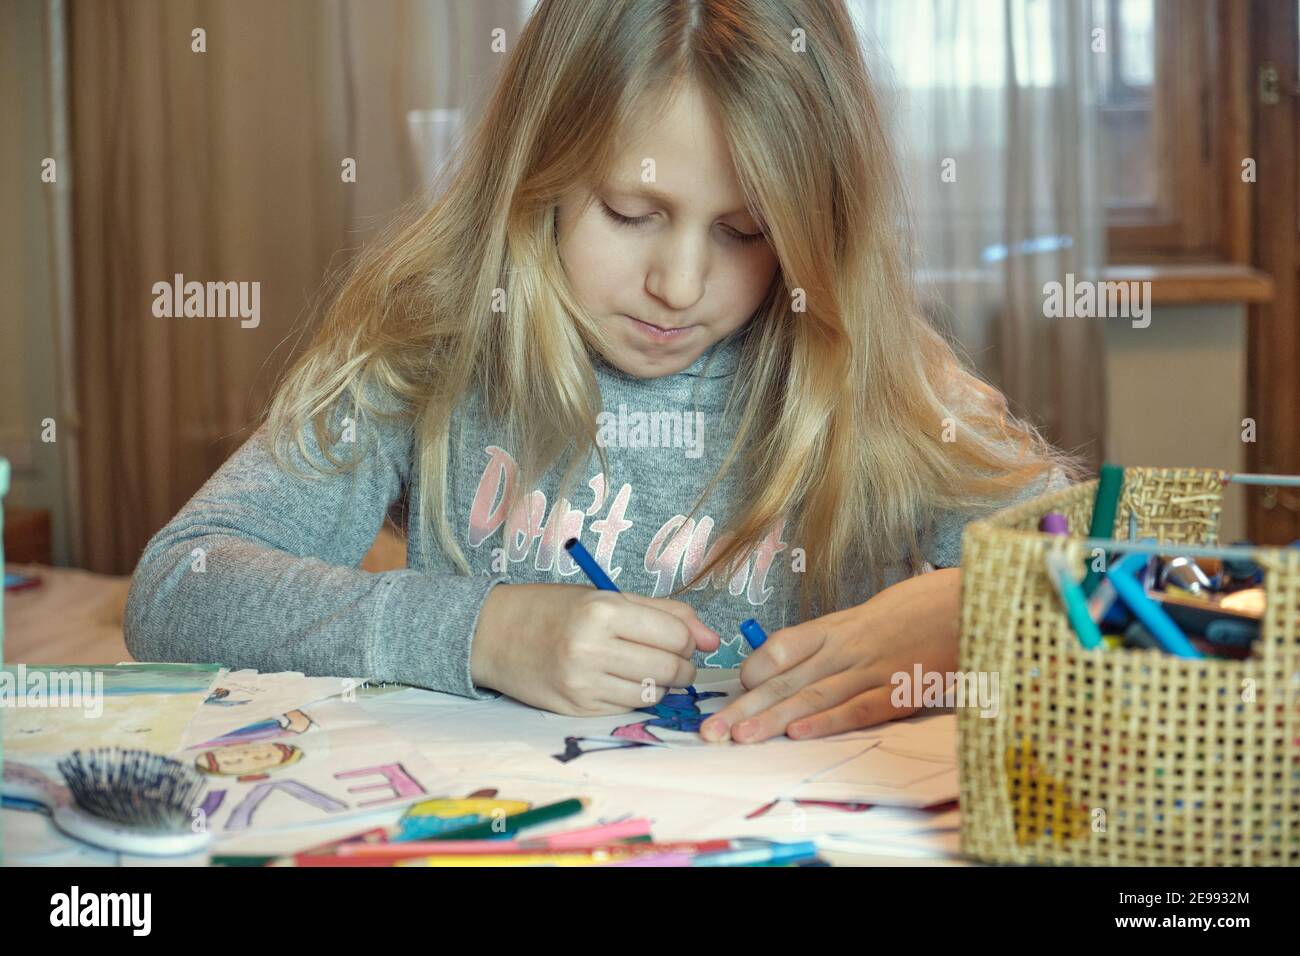 Little blonde girl drawing on her book and having fun at playtable. Child girl does her school homework at home. Stock Photo